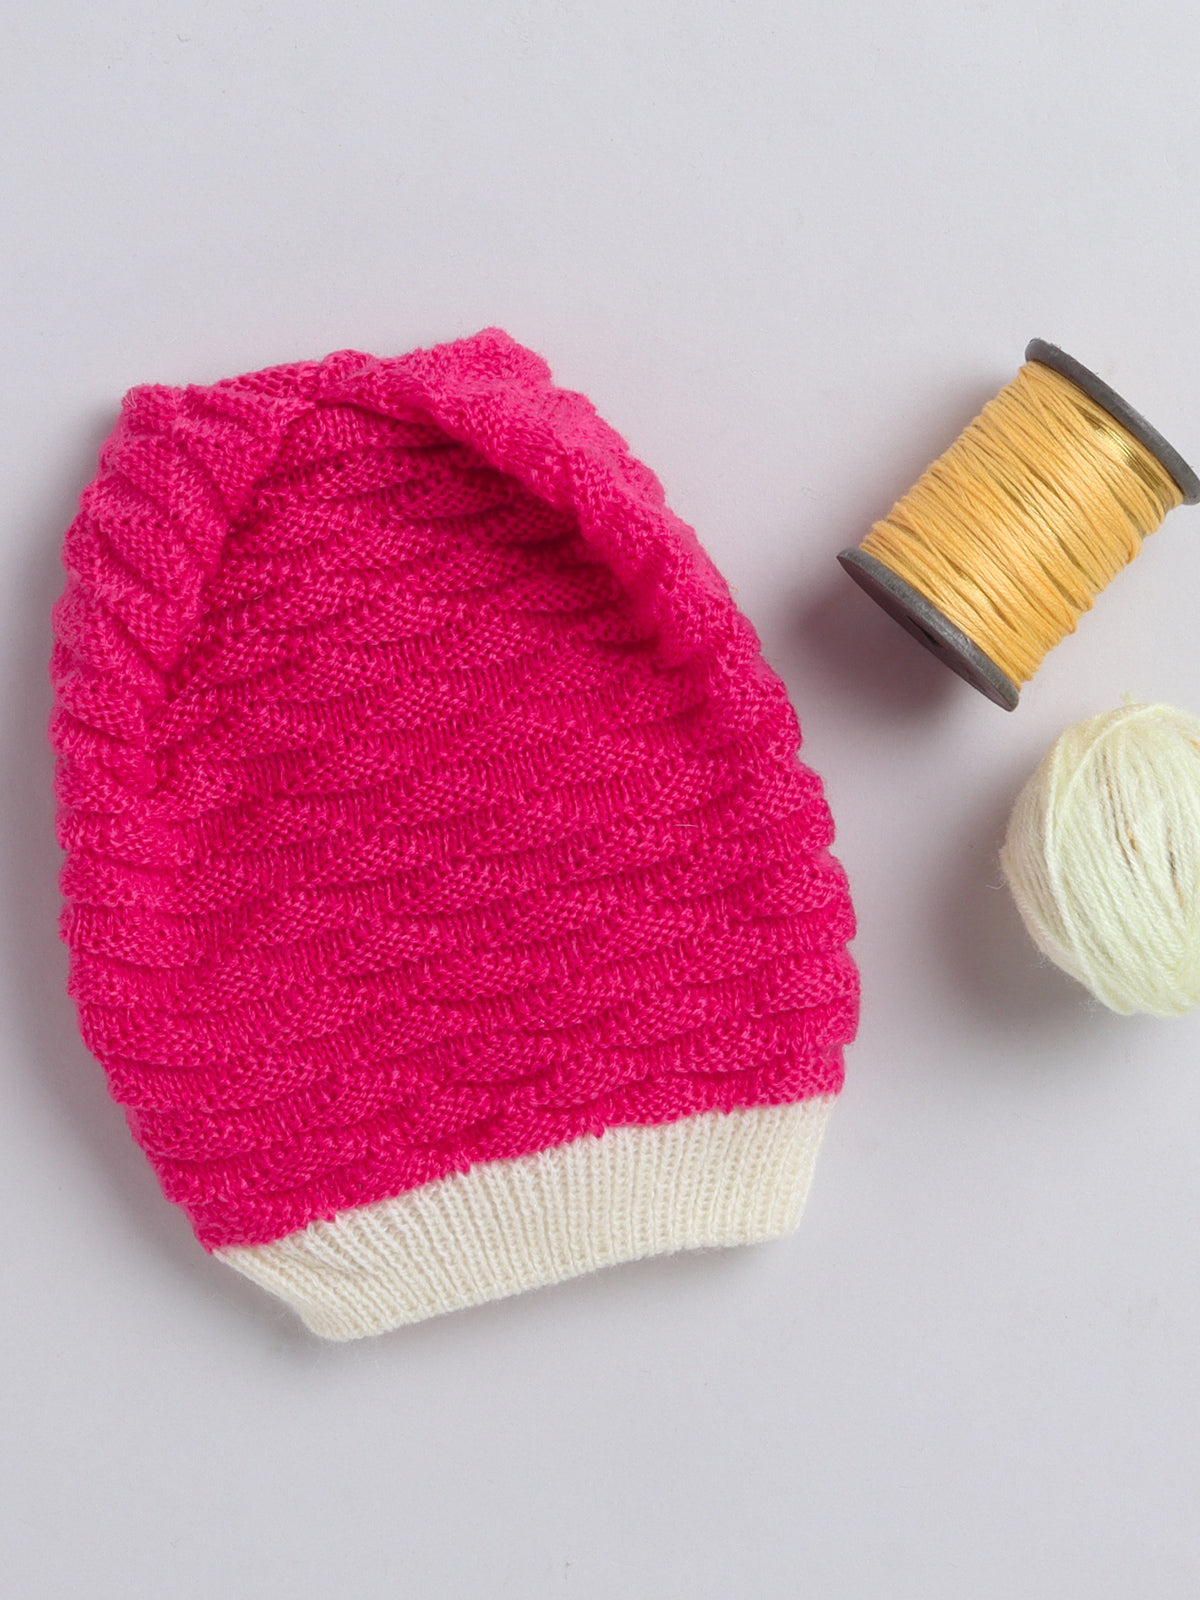 Elegant knitted Textured Round Cap with, Fuchsia